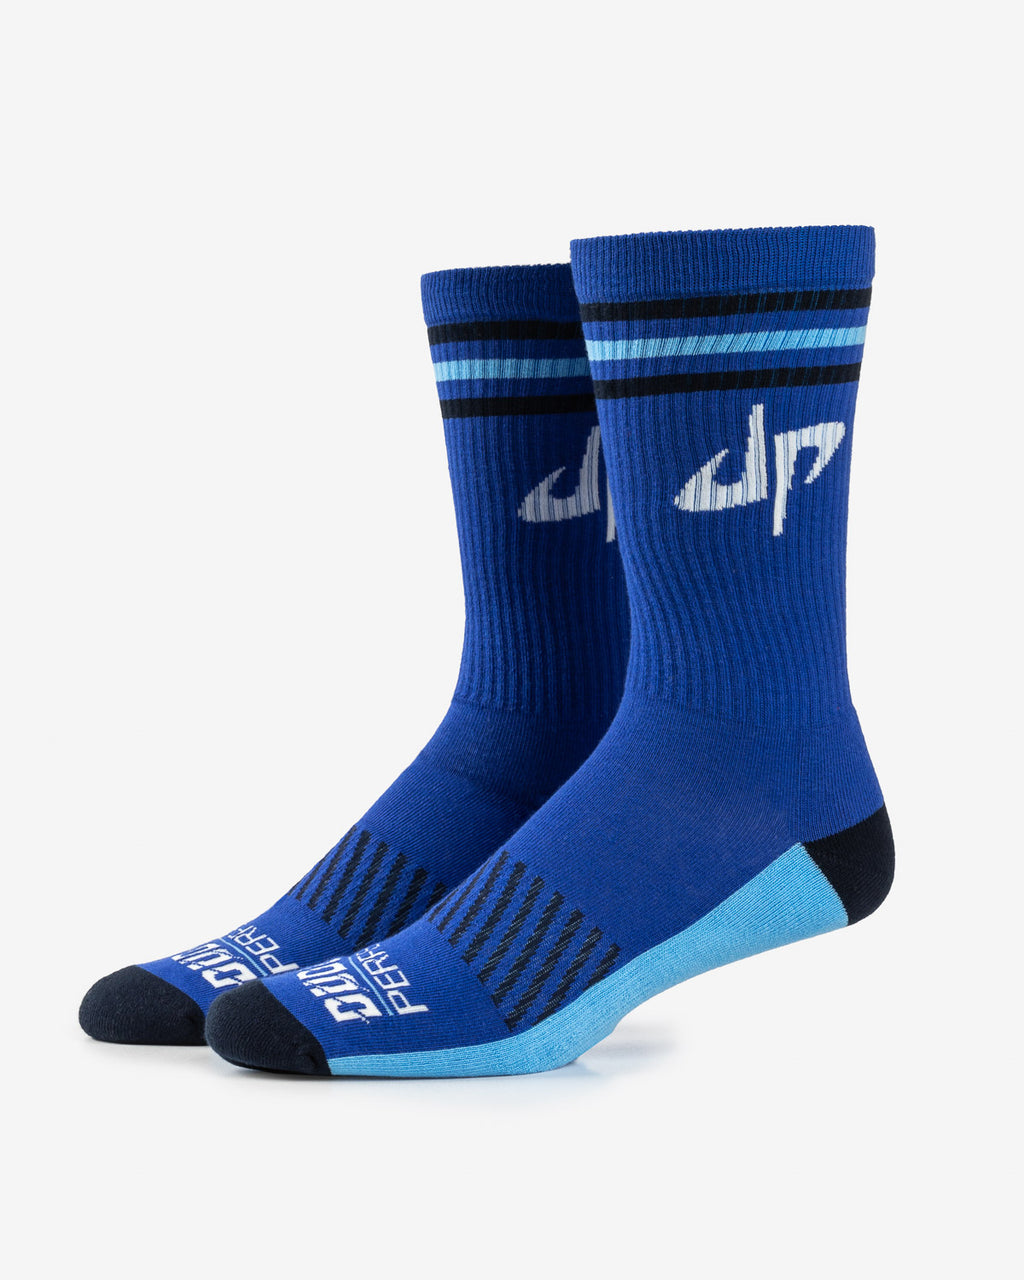 Dude Perfect 'Legacy' Socks (Blue) - Dude Perfect Official